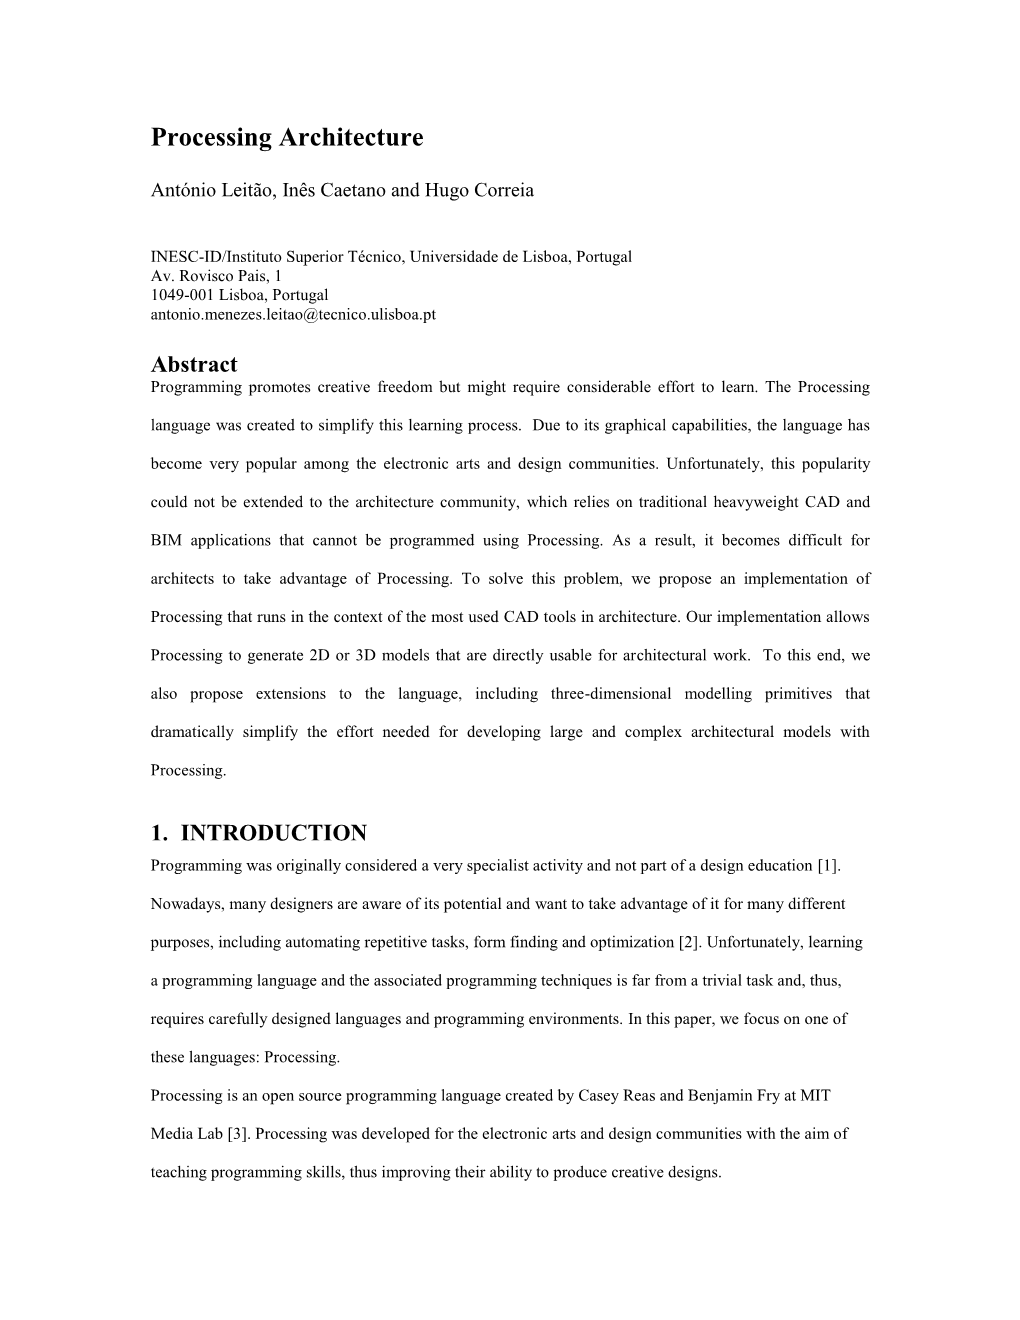 Papers for the International Journal of Architectural Computing